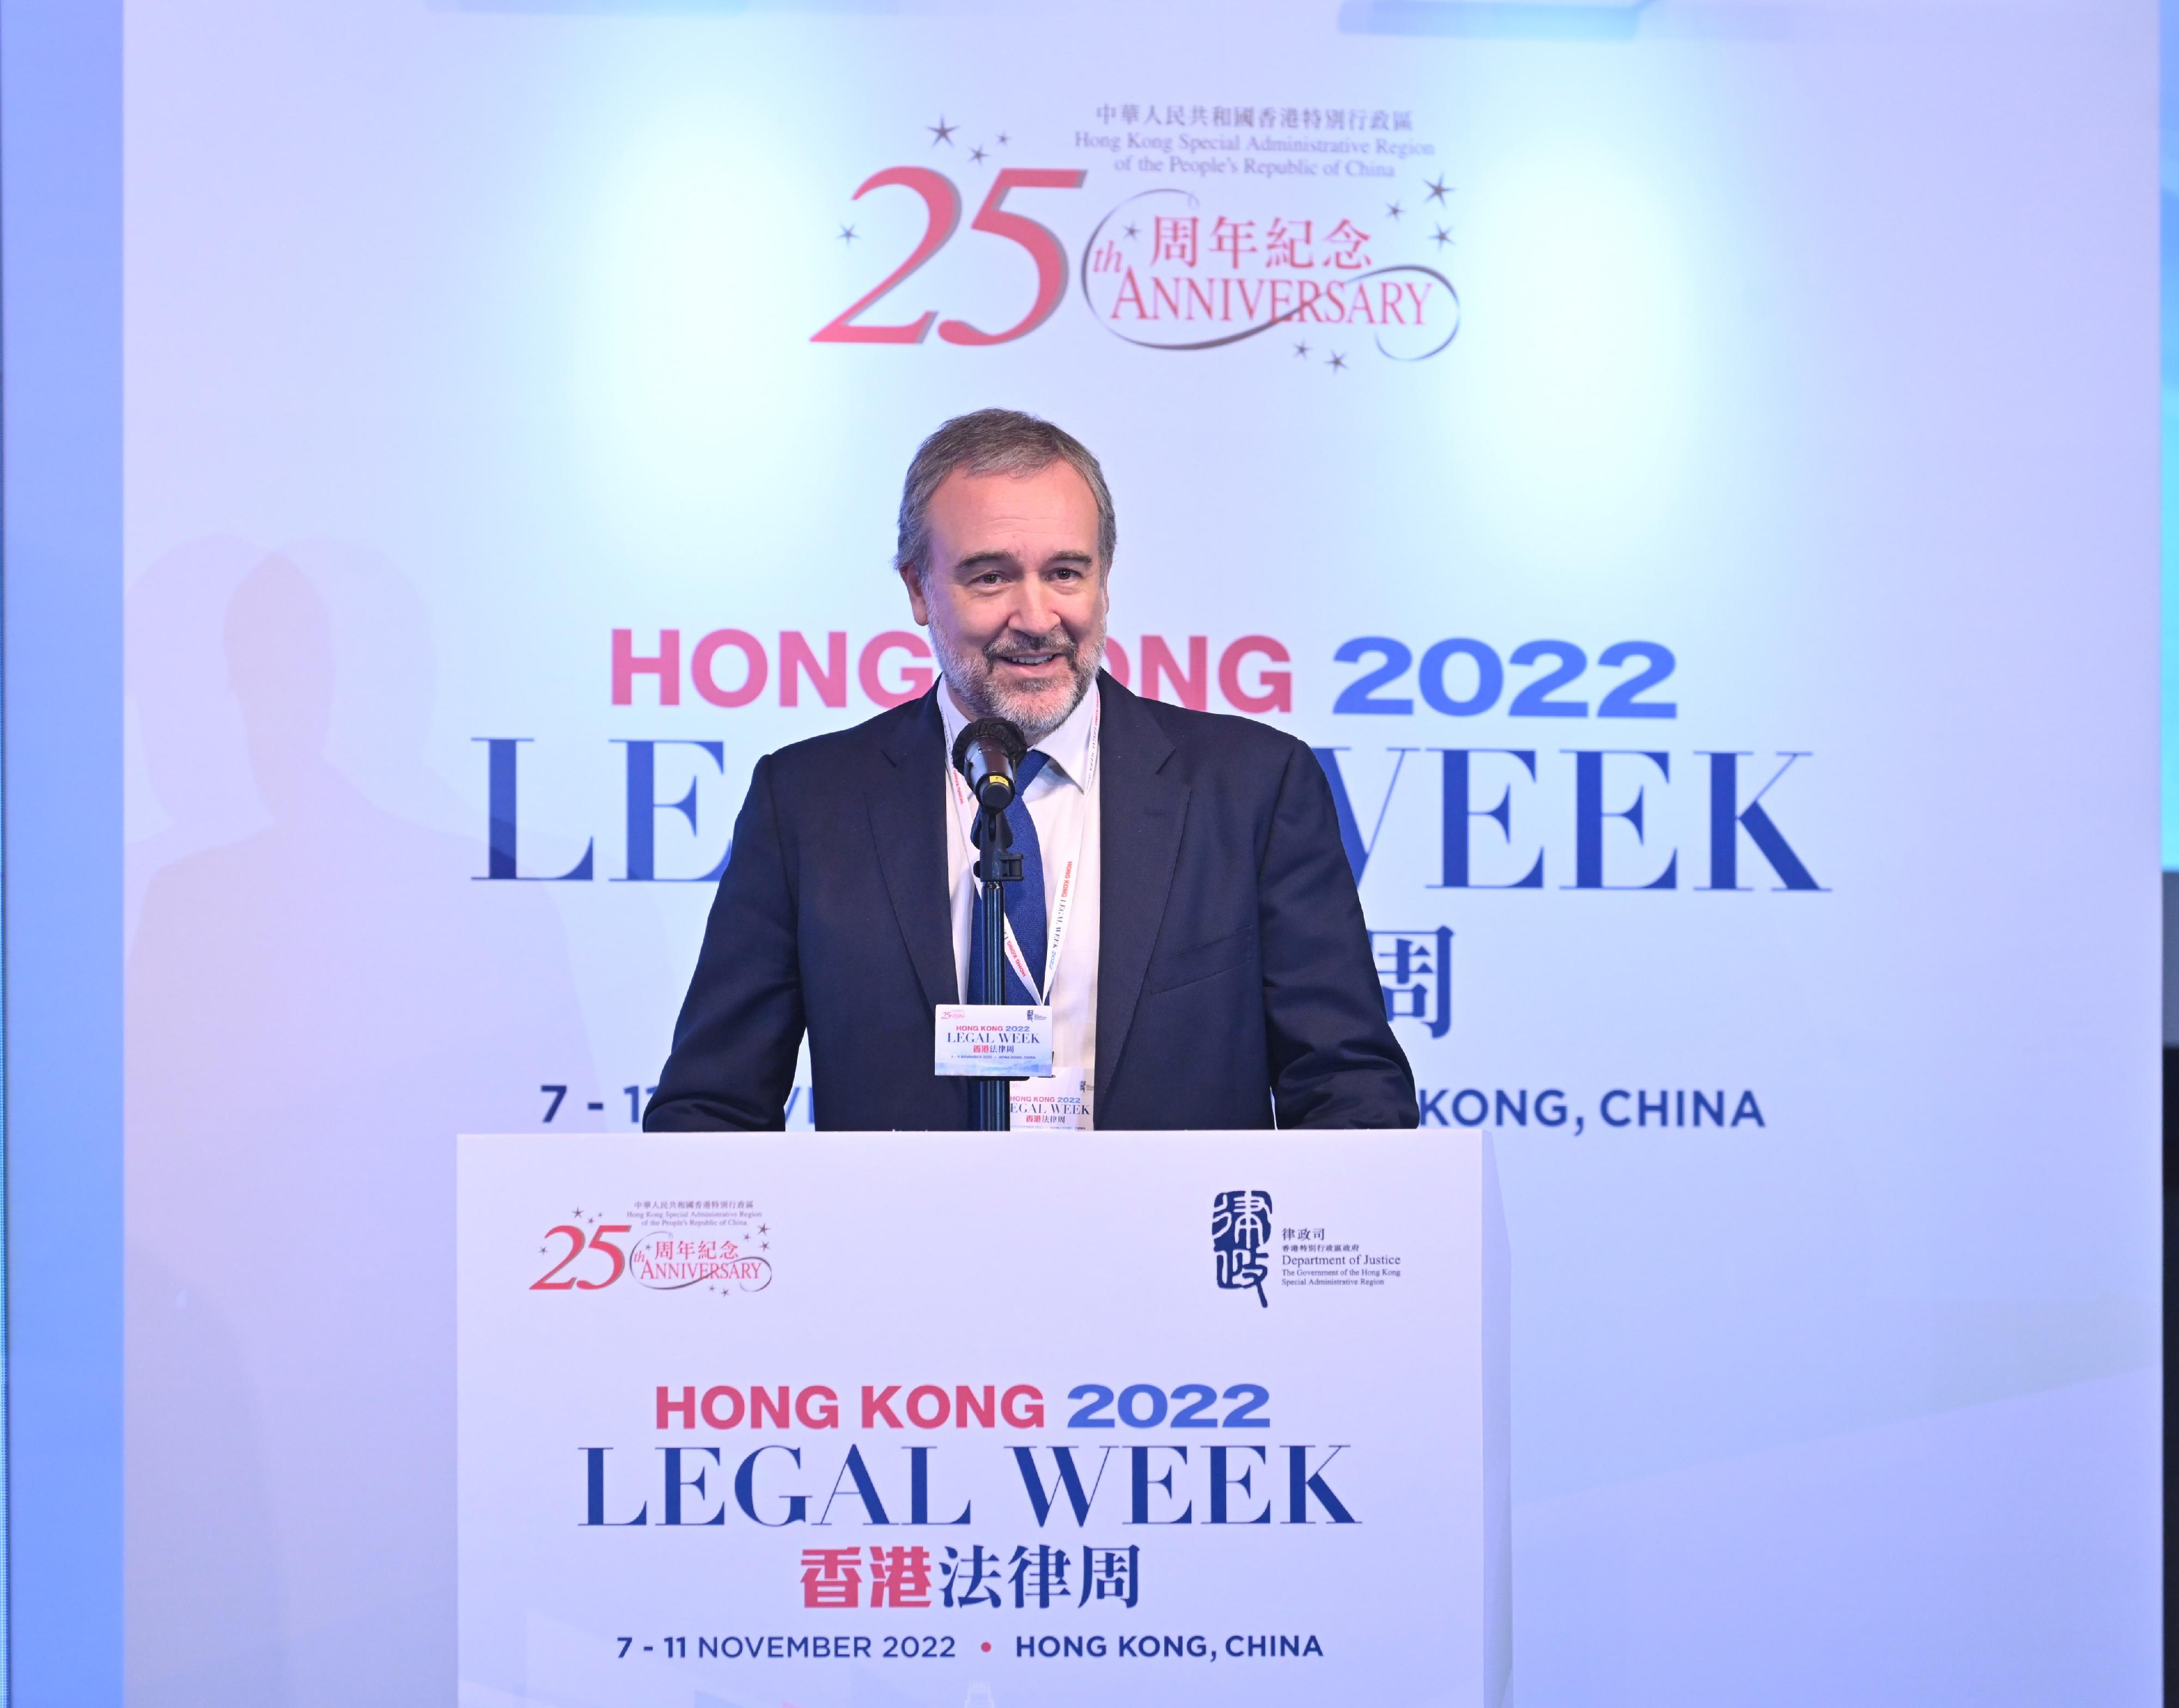 The Secretary-General of the International Institute for the Unification of Private Law, Professor Ignacio Tirado, speaks at the opening of Rule of Law Congress: Rule of Law and Justice for All under Hong Kong Legal Week 2022 today (November 11).
